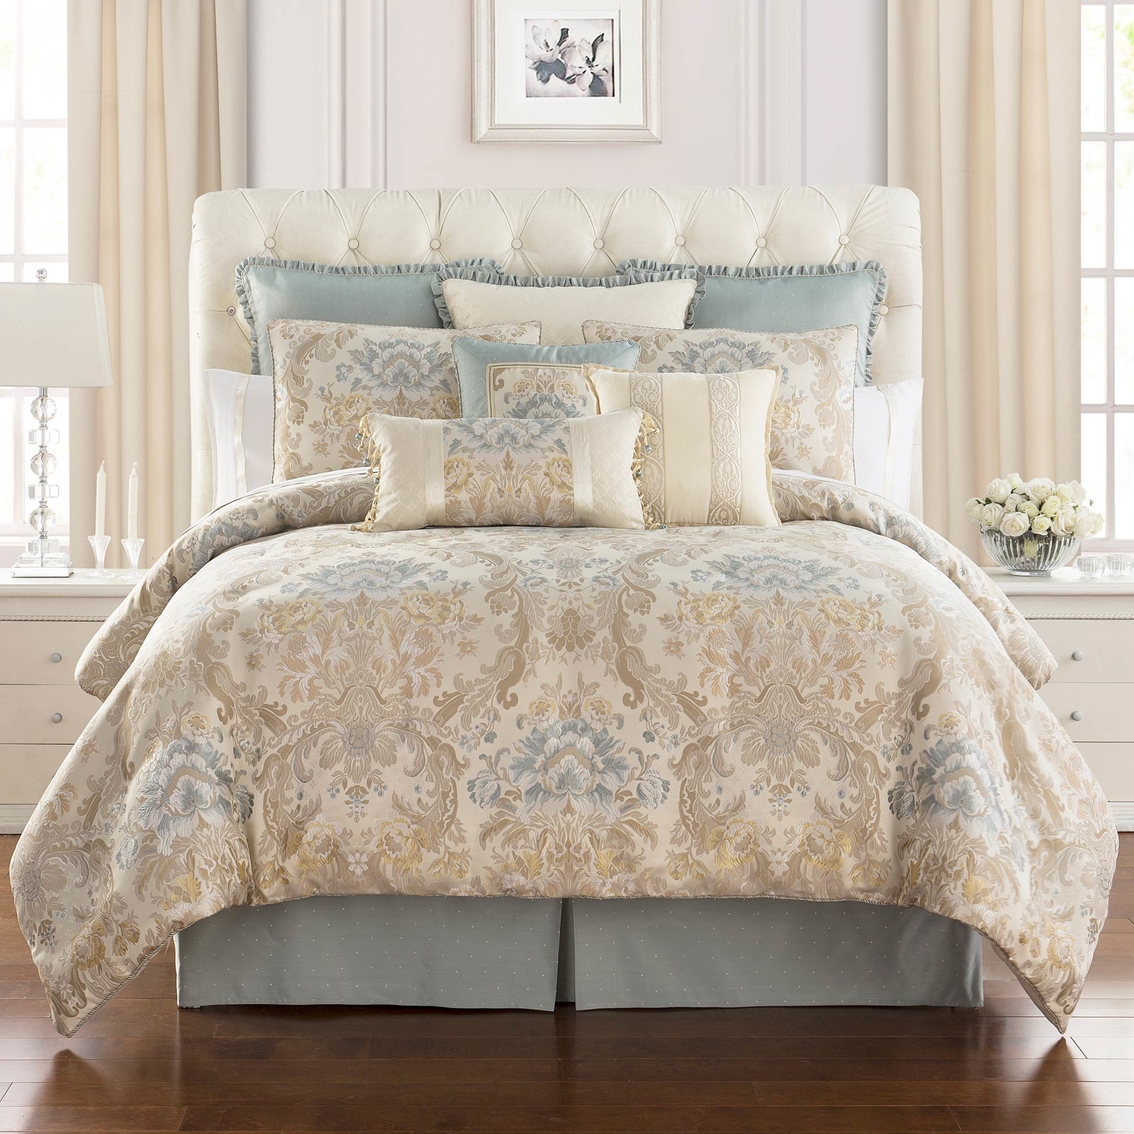 Marquis by Waterford Warren Multicolor Comforter Set - Image 2 of 3